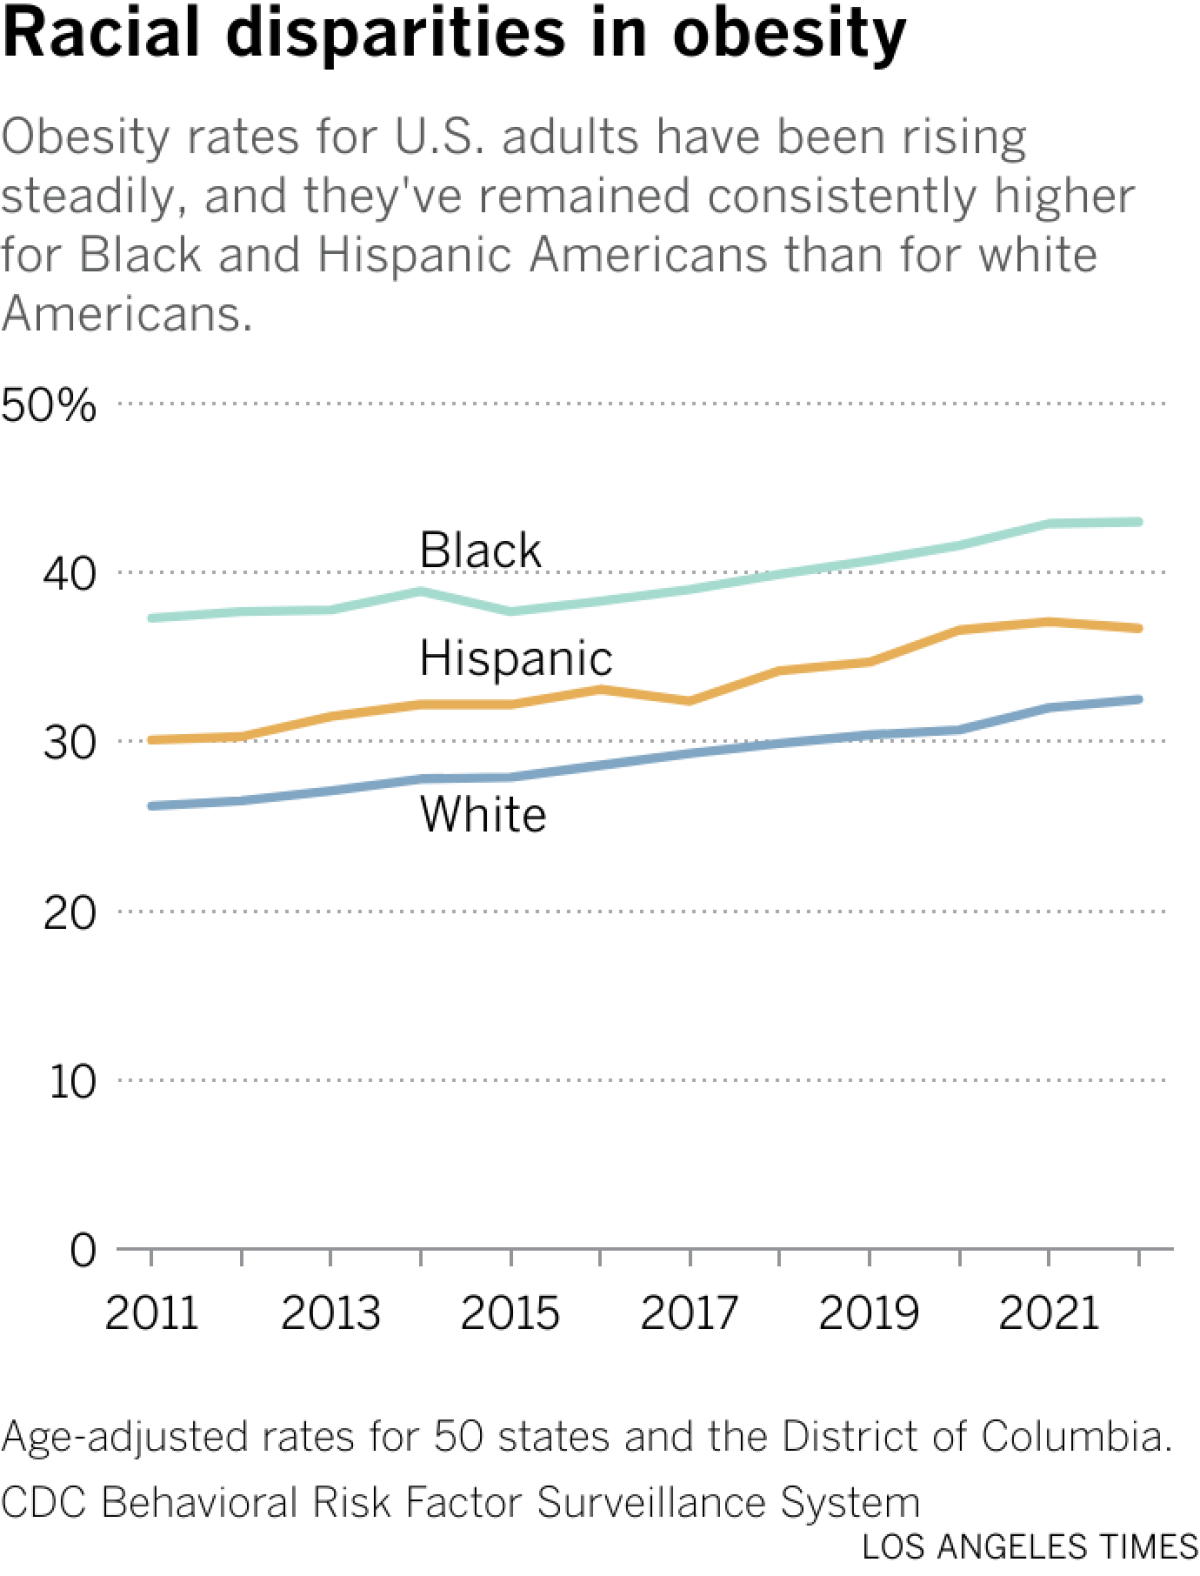 Obesity rates for U.S. adults have been rising steadily, and they've remained consistently higher for Black and Hispanic Americans than for white Americans.